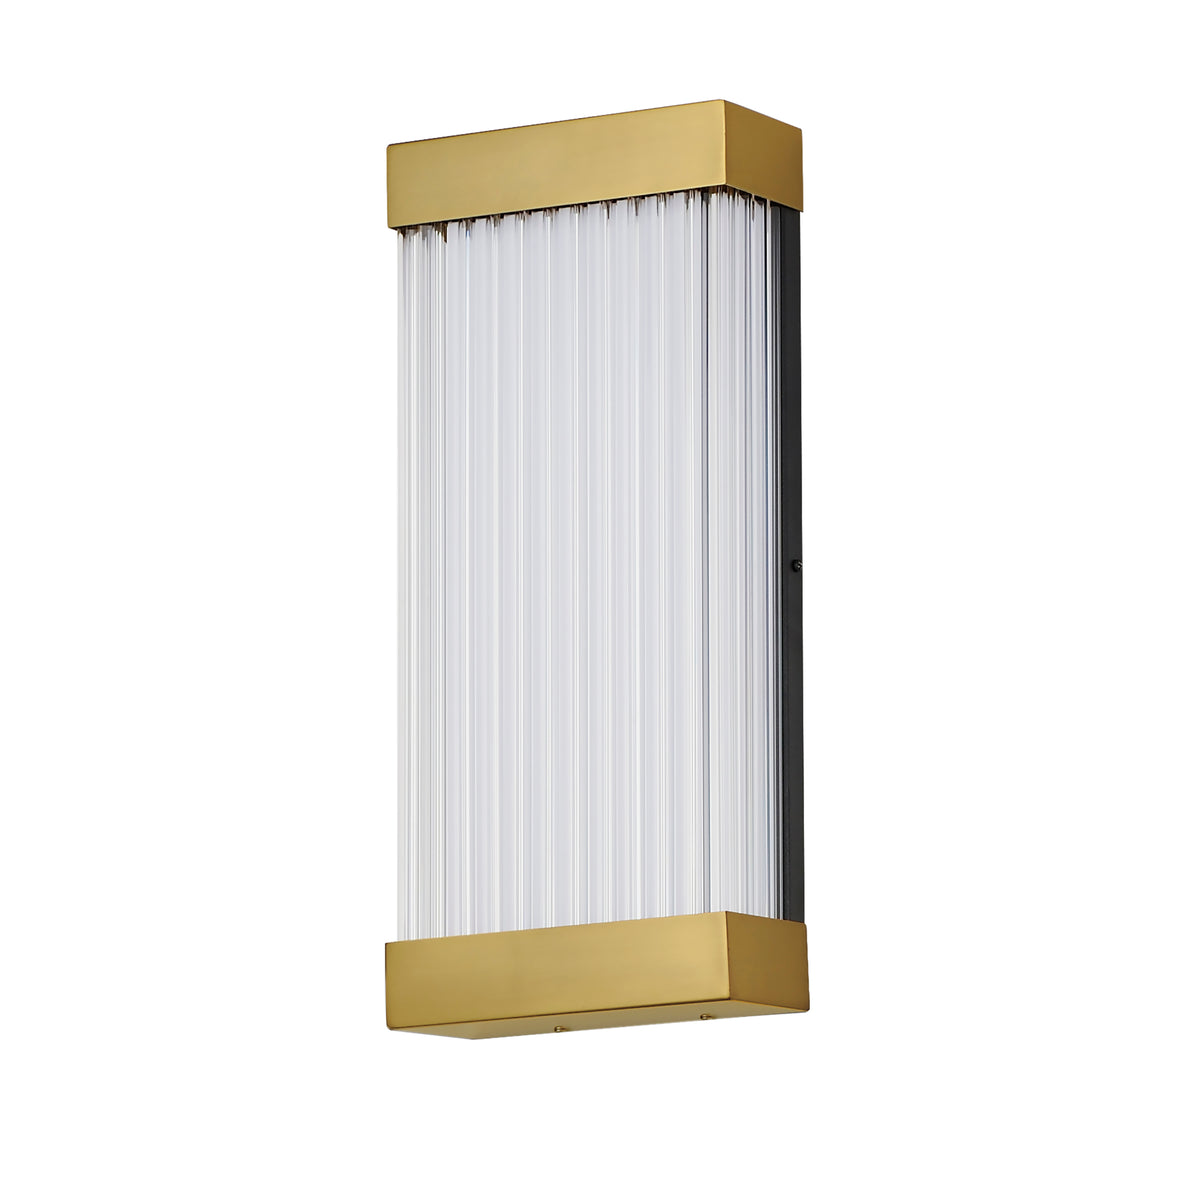 ET2 - E30232-122NAB - LED Wall Sconce - Acropolis - Natural Aged Brass